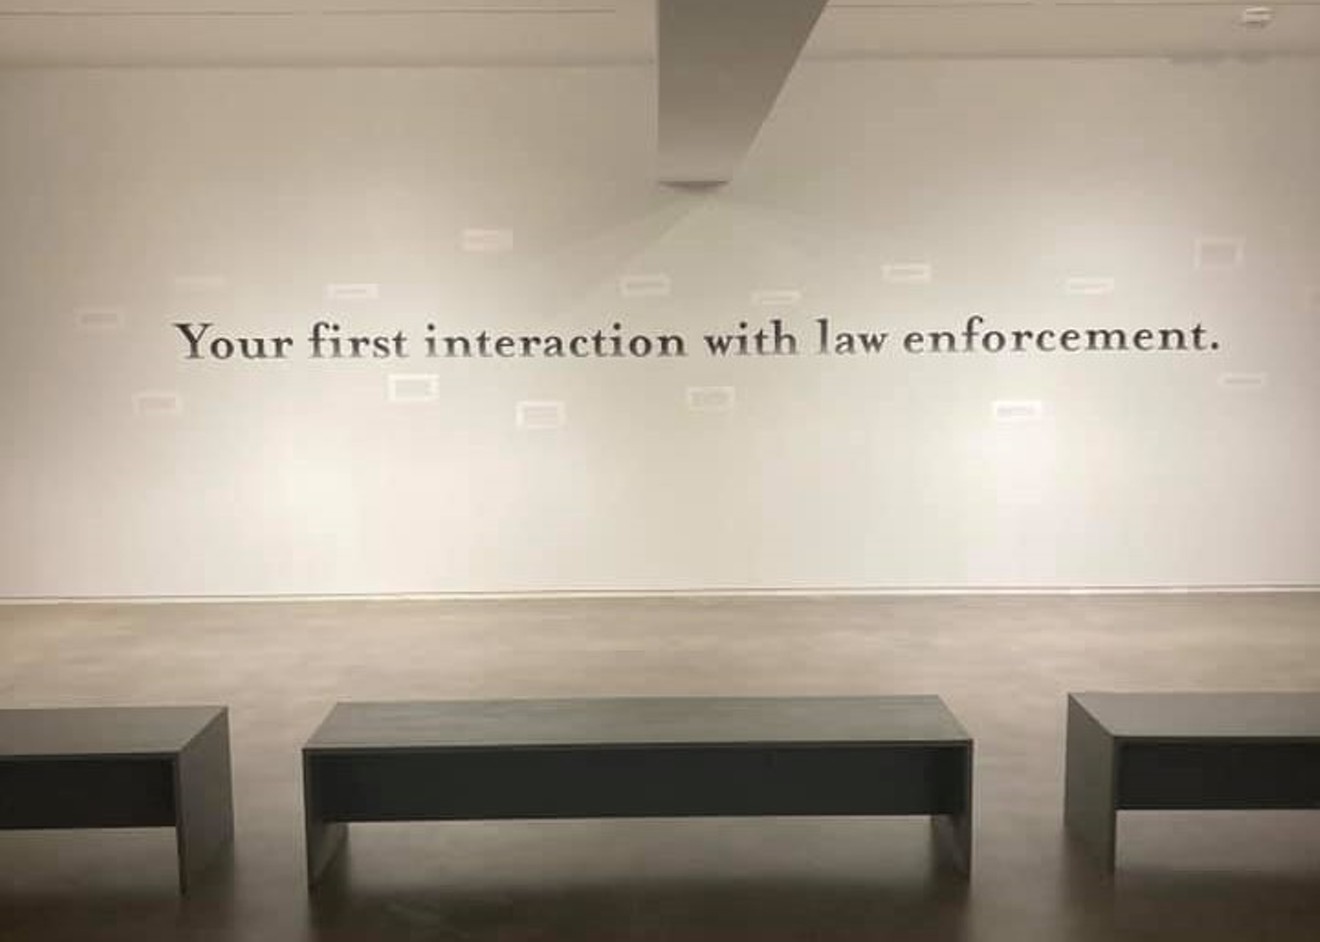 Visitors can have their stories of interactions with the police printed and displayed anonymously.